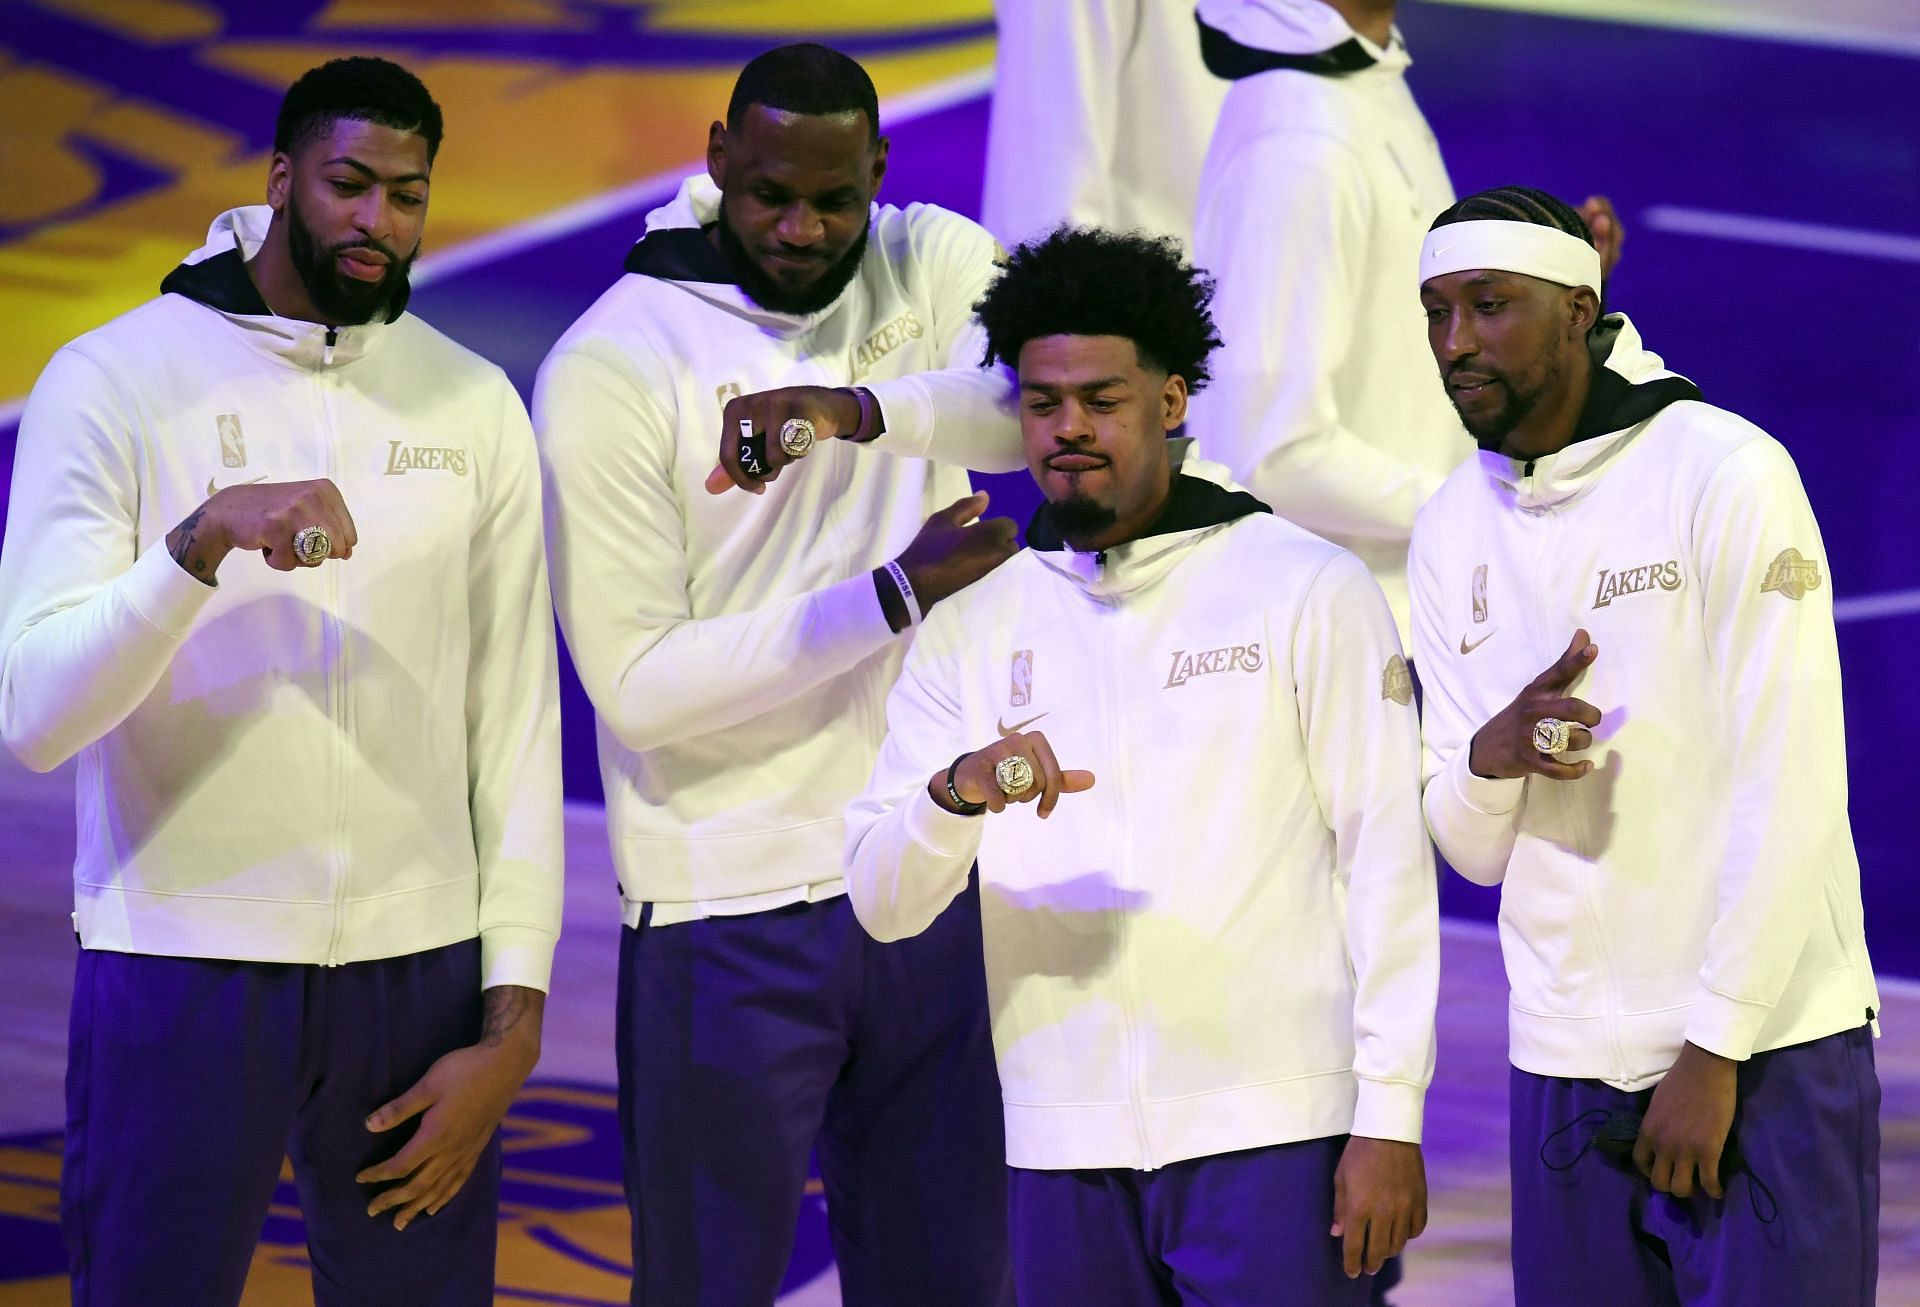 (L-R) Anthony Davis, LeBron James, Quinn Cook, and Kentavious Caldwell-Pope of the LA Lakers pose during the 2020 NBA championship ring ceremony.